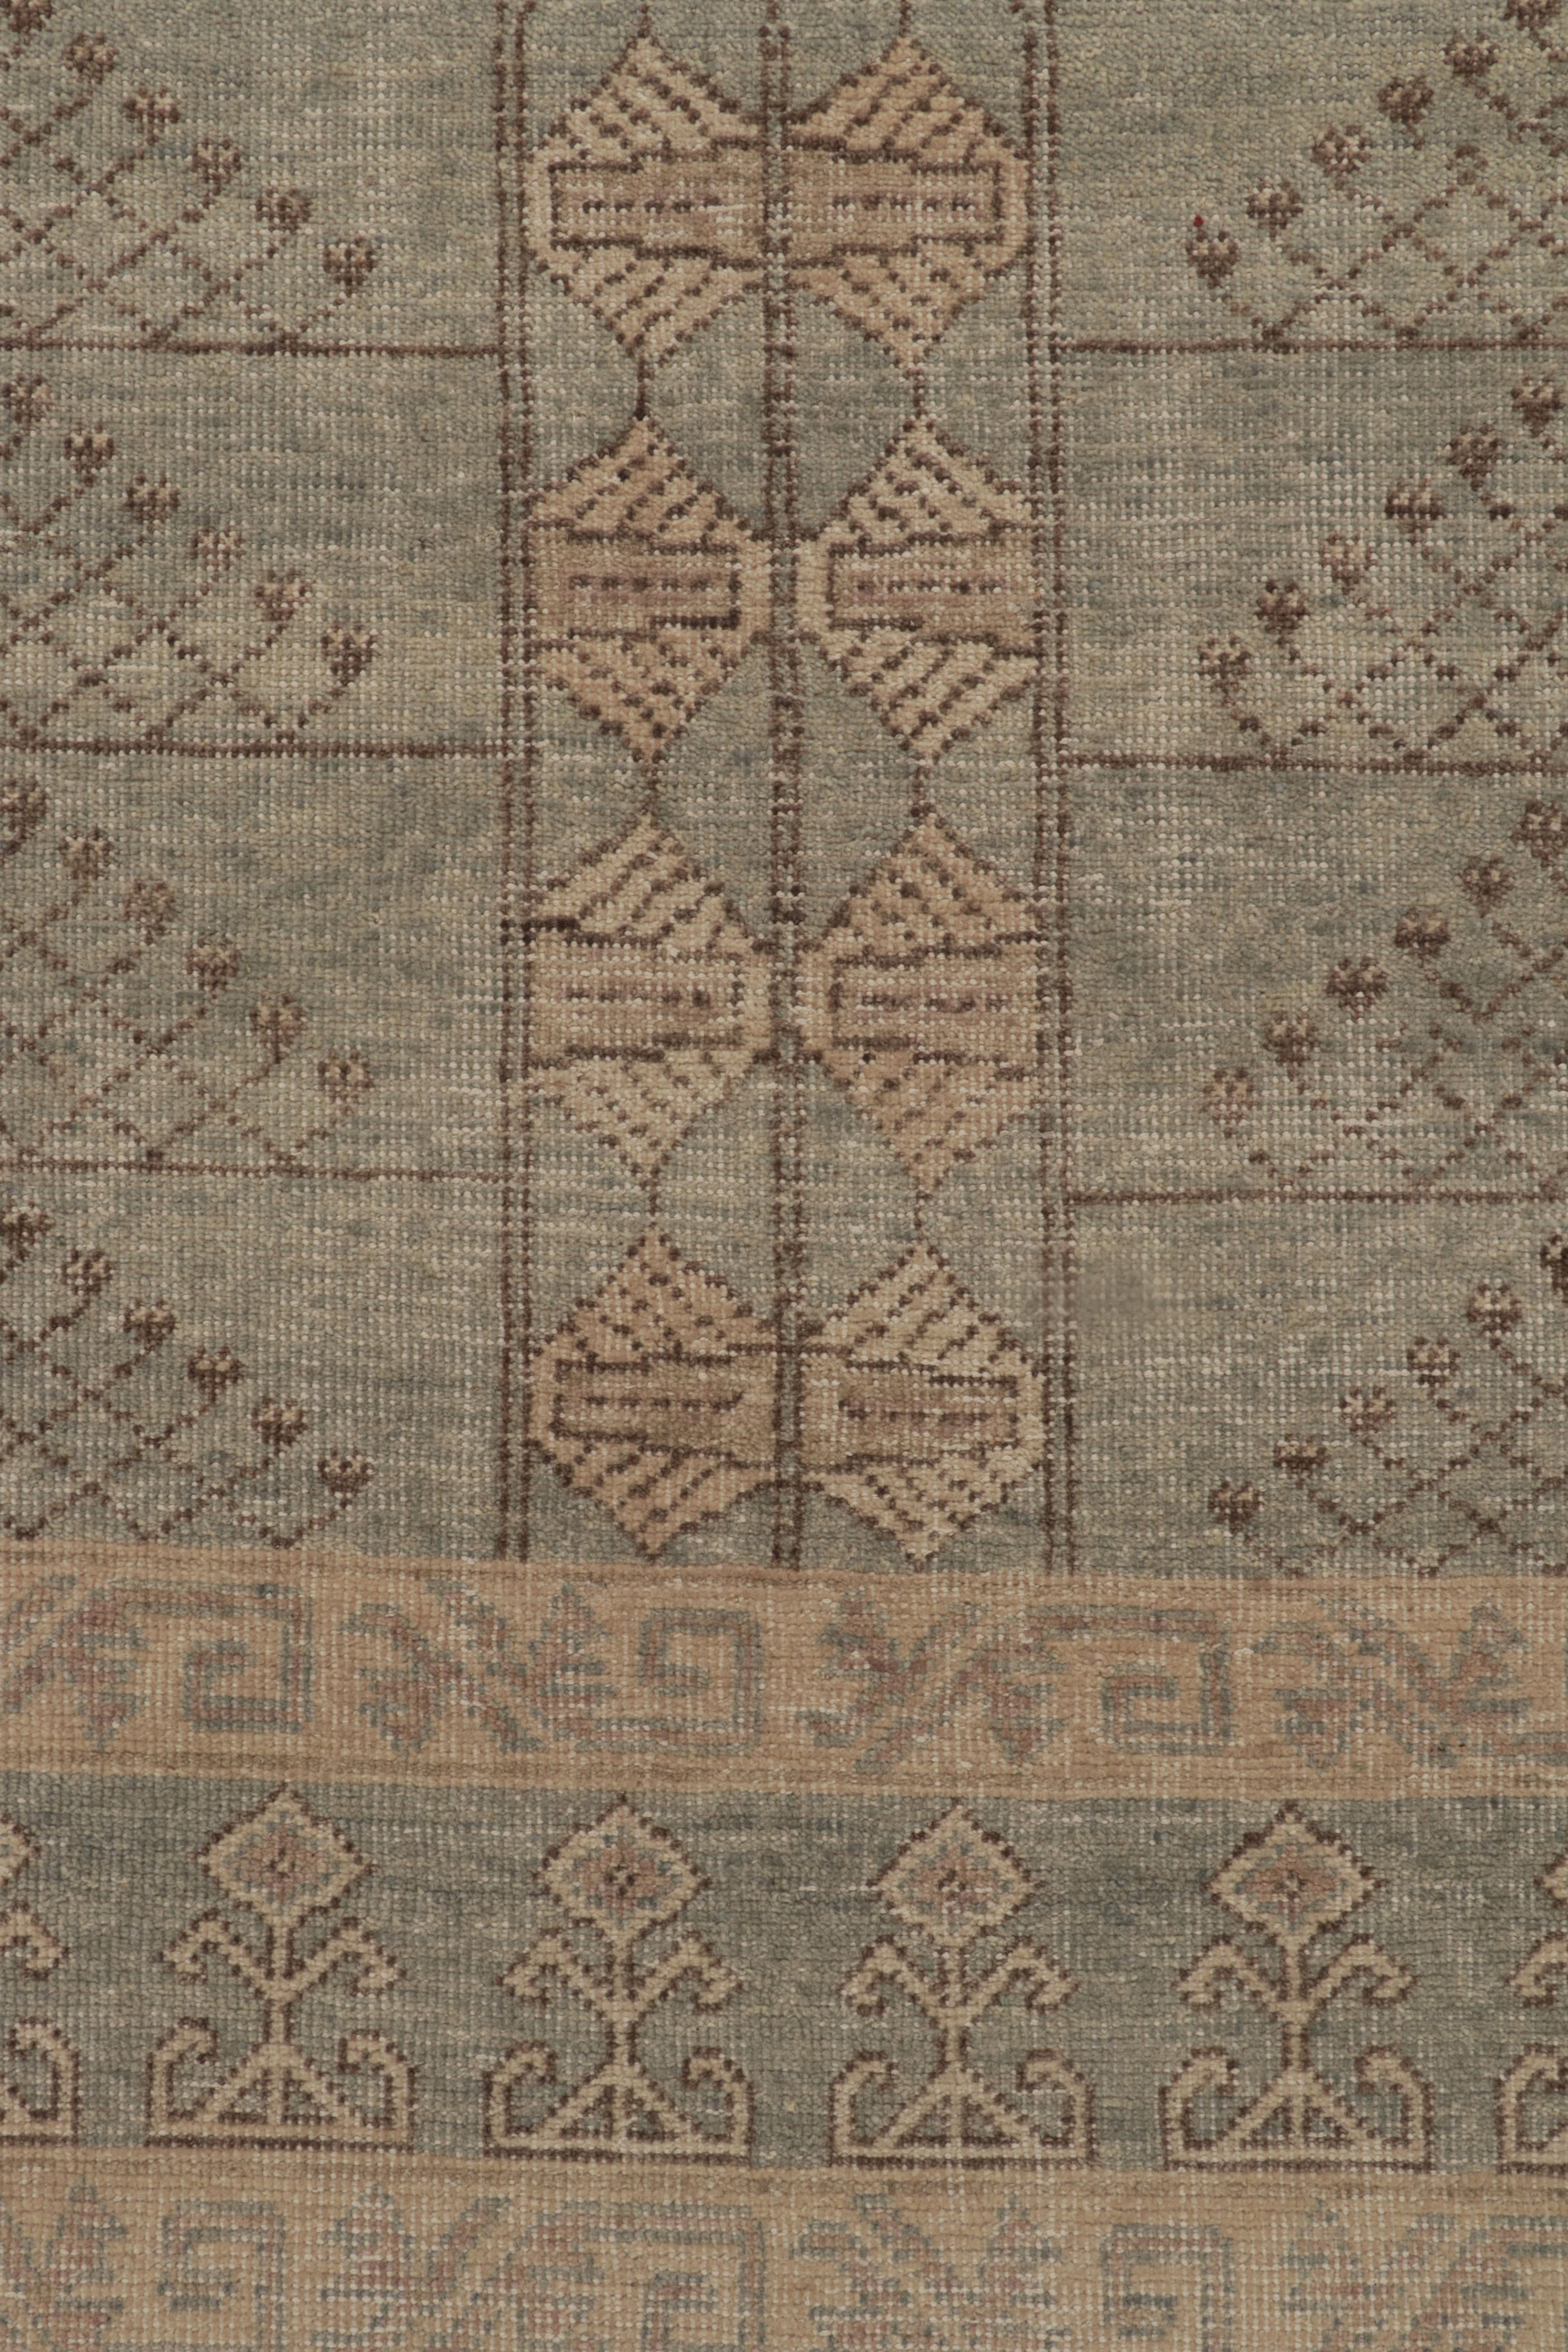 Hand-Knotted Rug & Kilim’s Distressed Style Rug in Blue and Beige-Brown Ensi Patterns For Sale